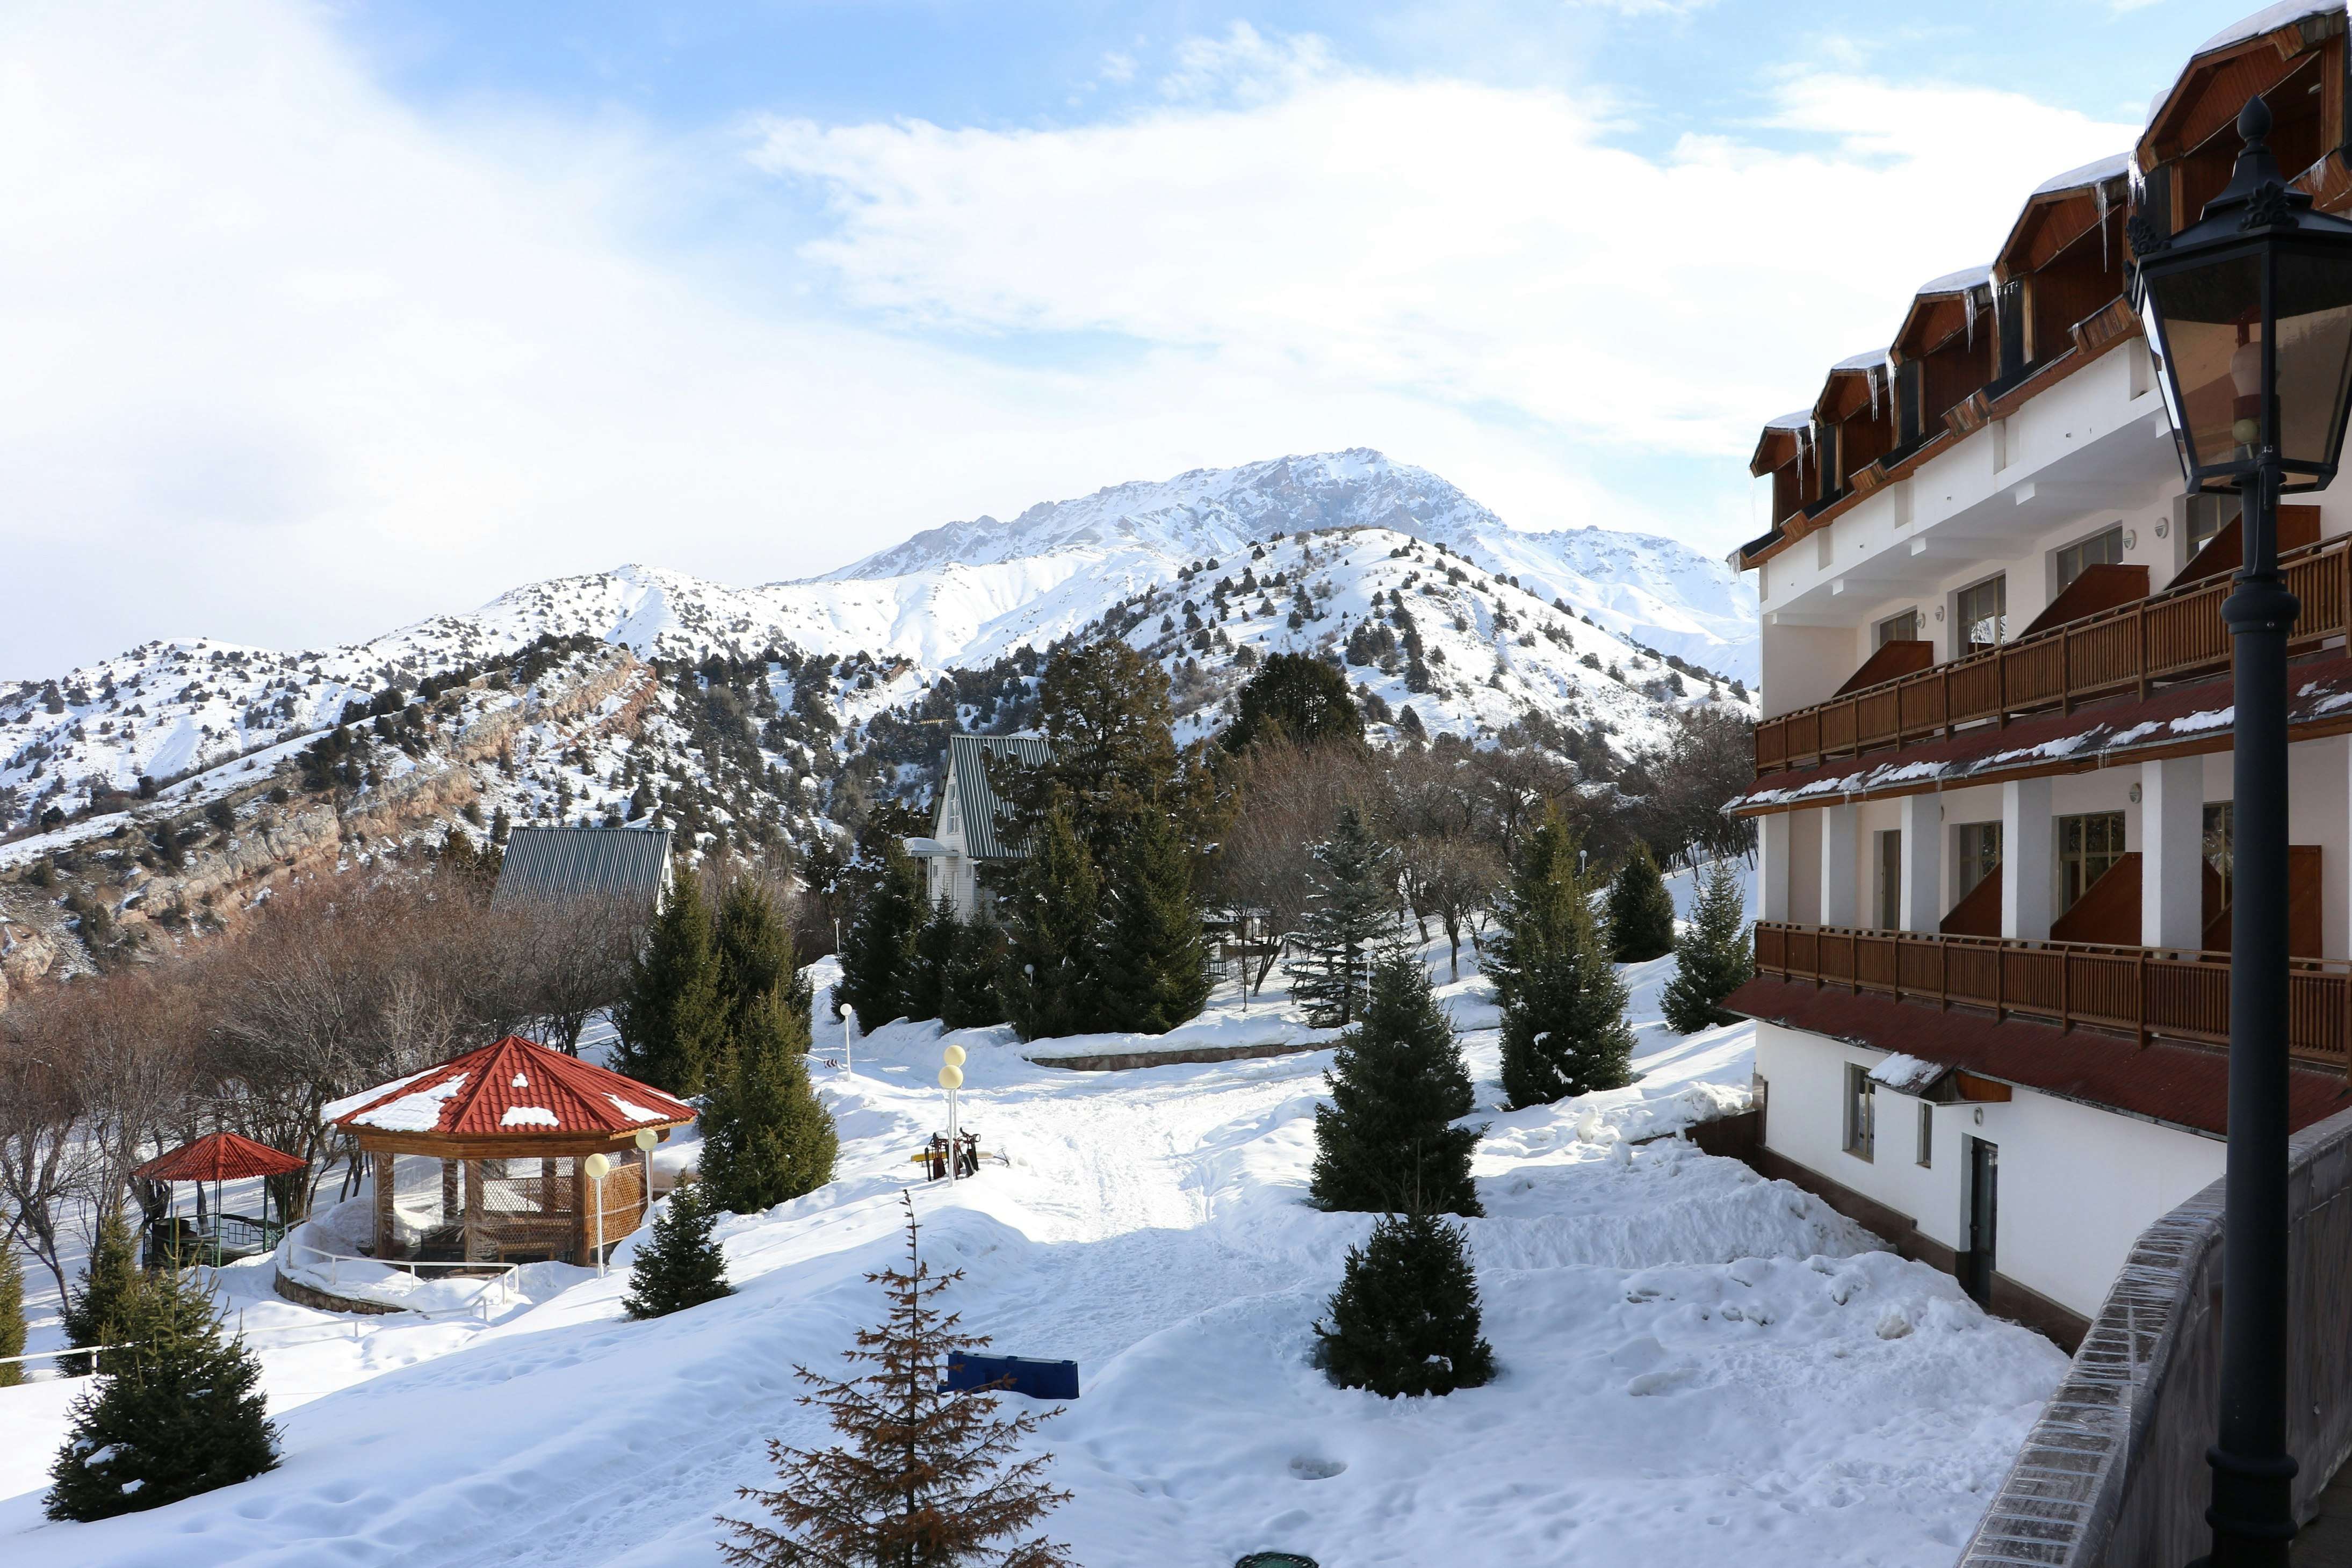 A view looking out over a snowy landscape, taken from the balcony of a hotel. Some of the hotel is visible in the shot, which has a traditional ski lodge look.